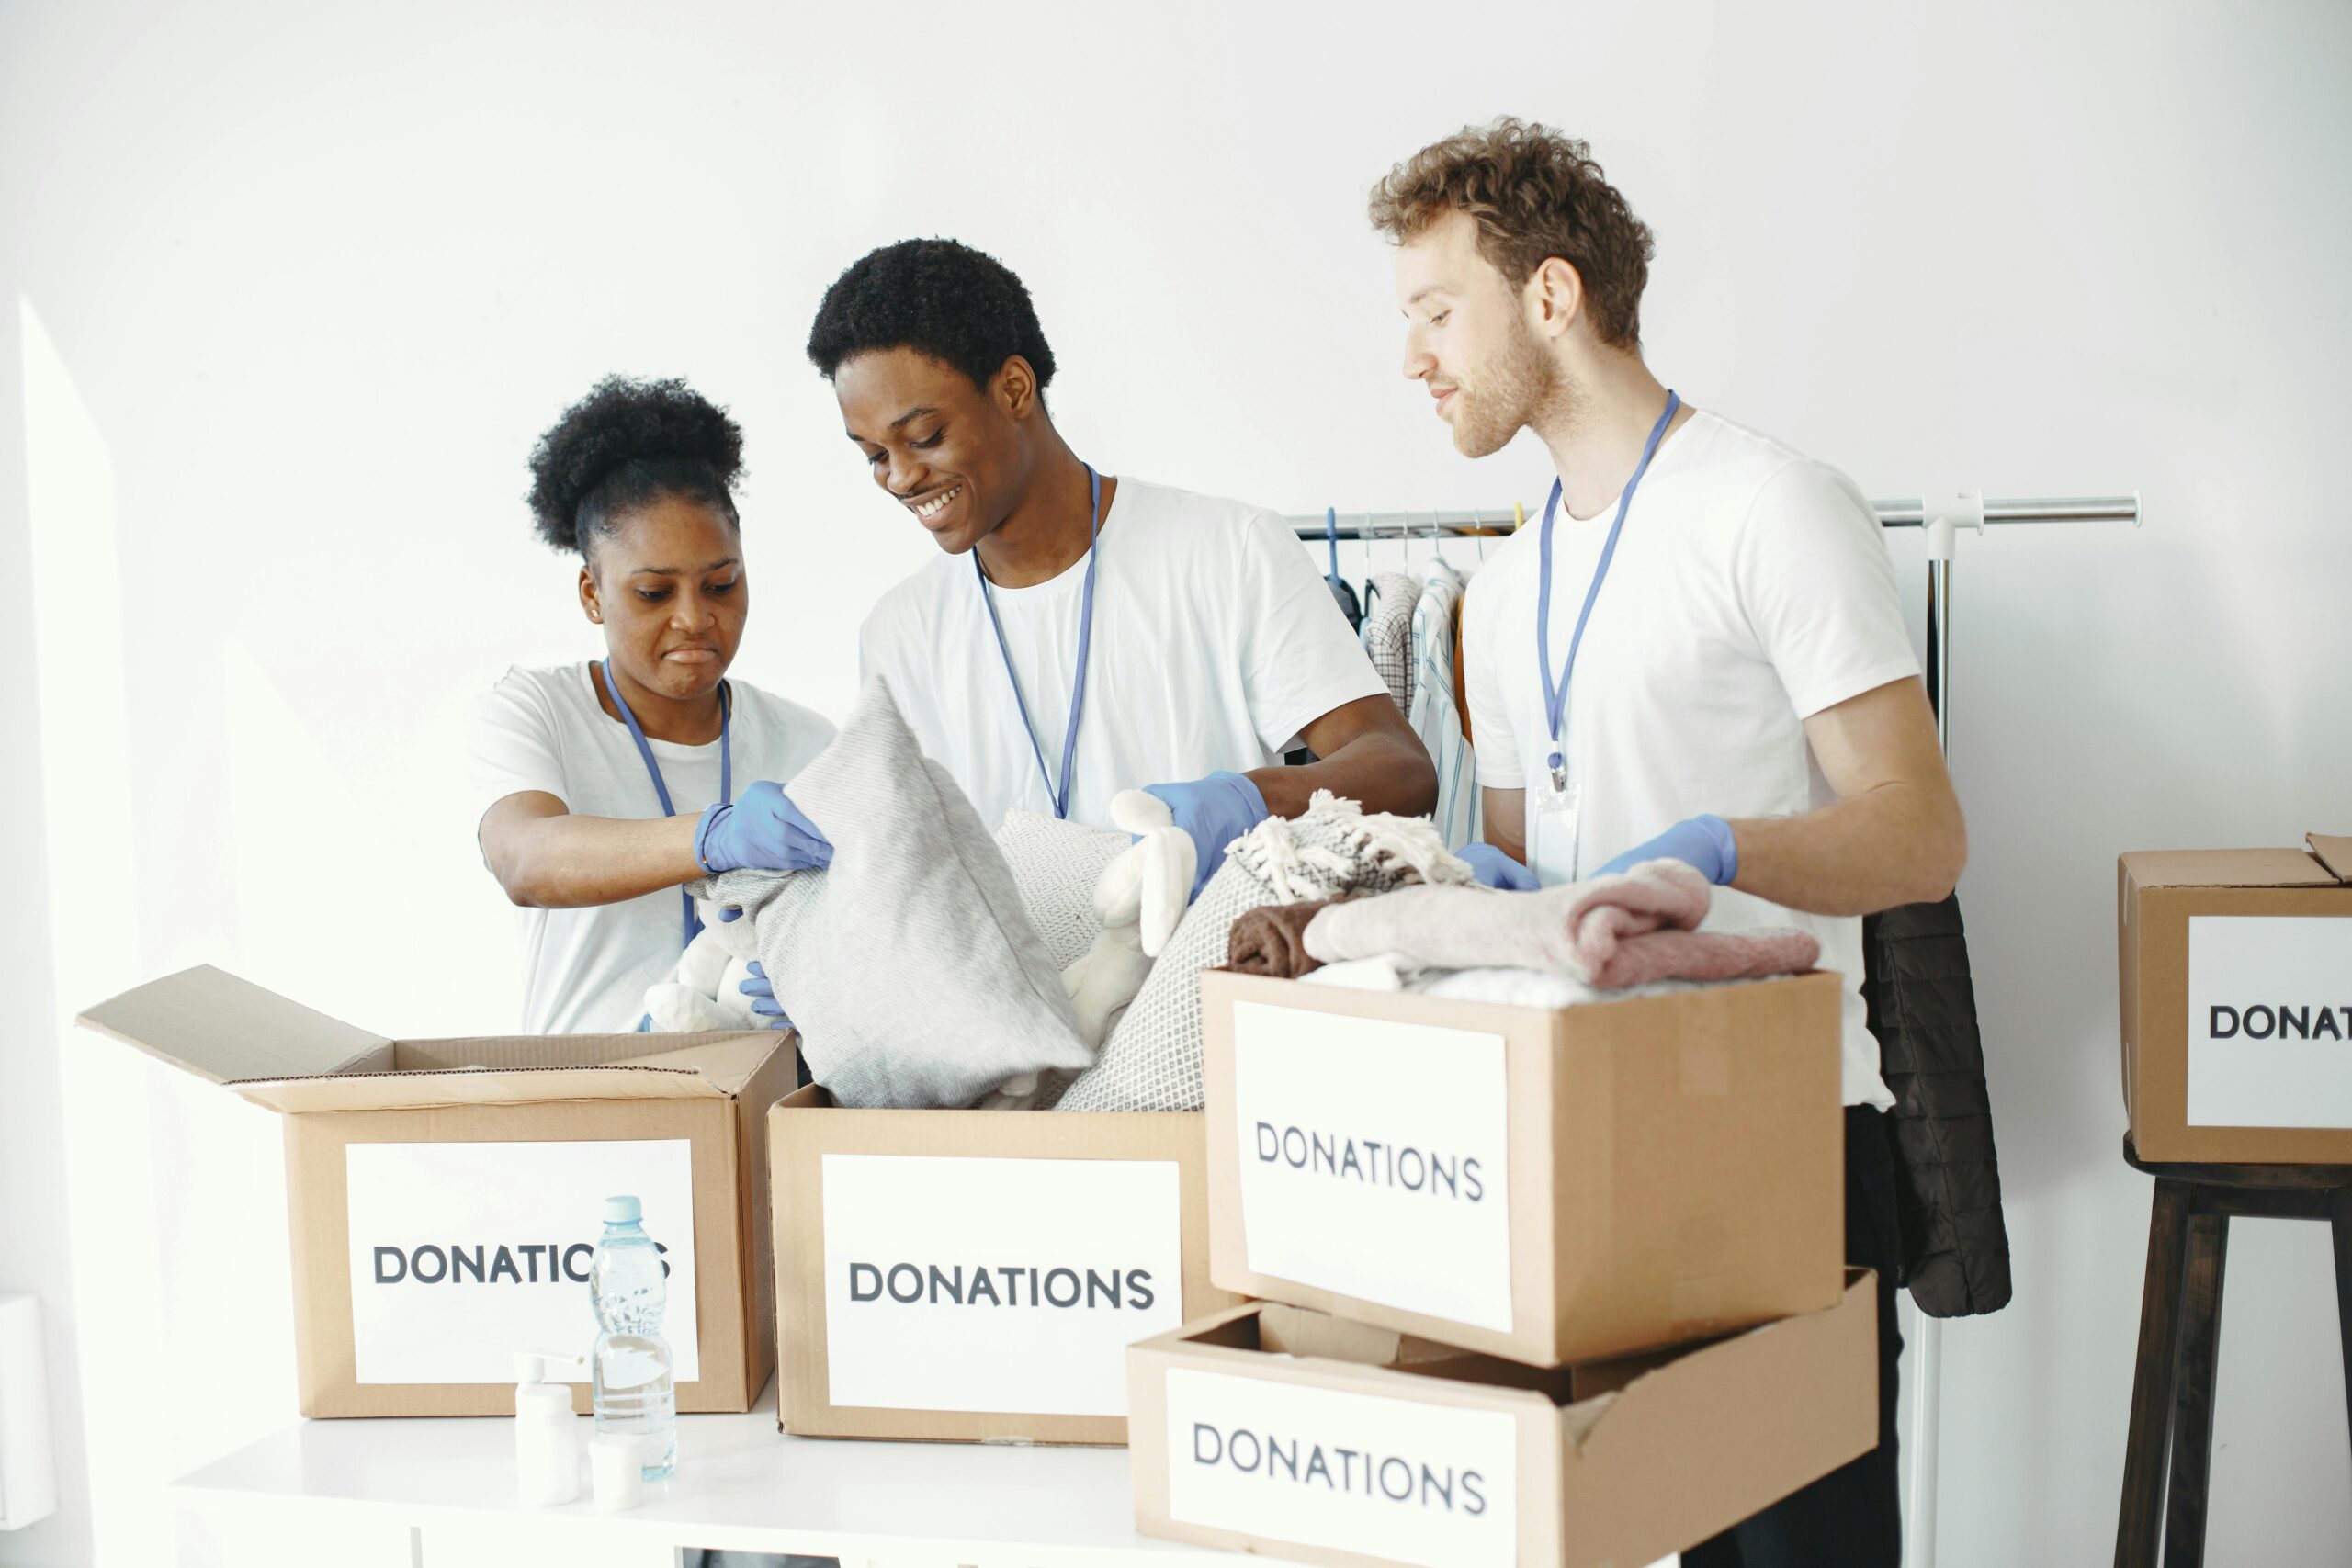 Picture of three people organizing a bunch of boxes for donations. The boxes are placed on a table, the background is white.